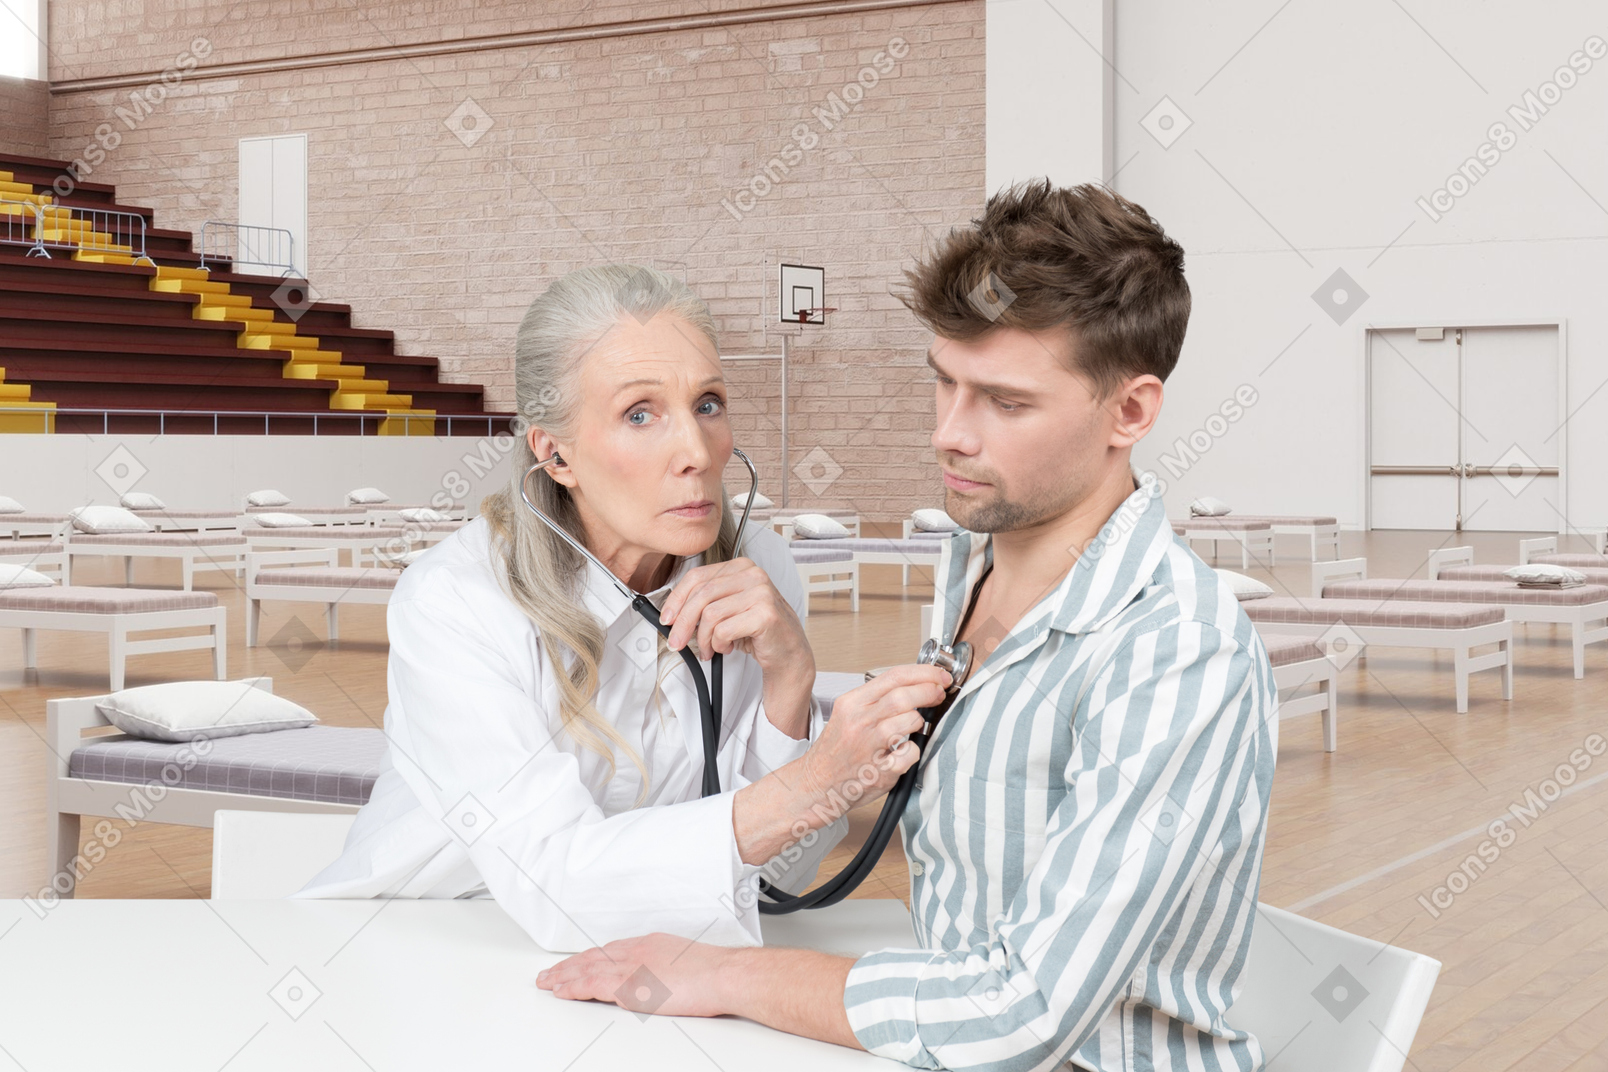 A doctor examines patient with stethoscope in a gymnasium